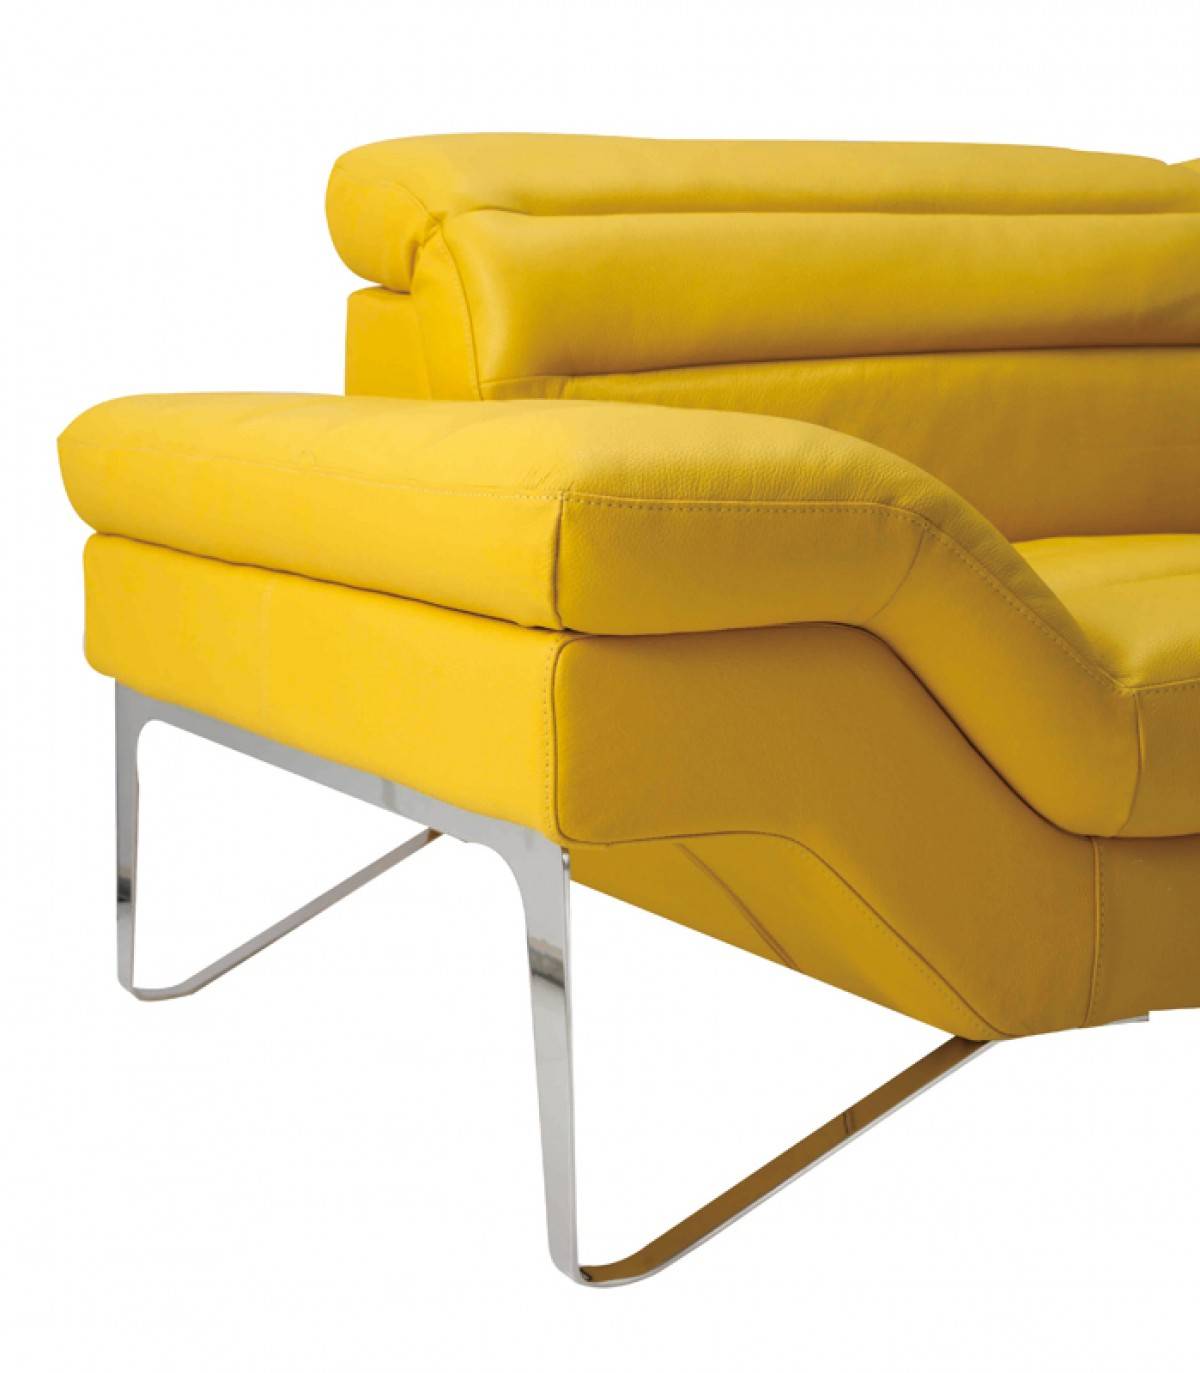 Advanced Adjustable Furniture Italian Leather Upholstery with Soft Seats - Click Image to Close